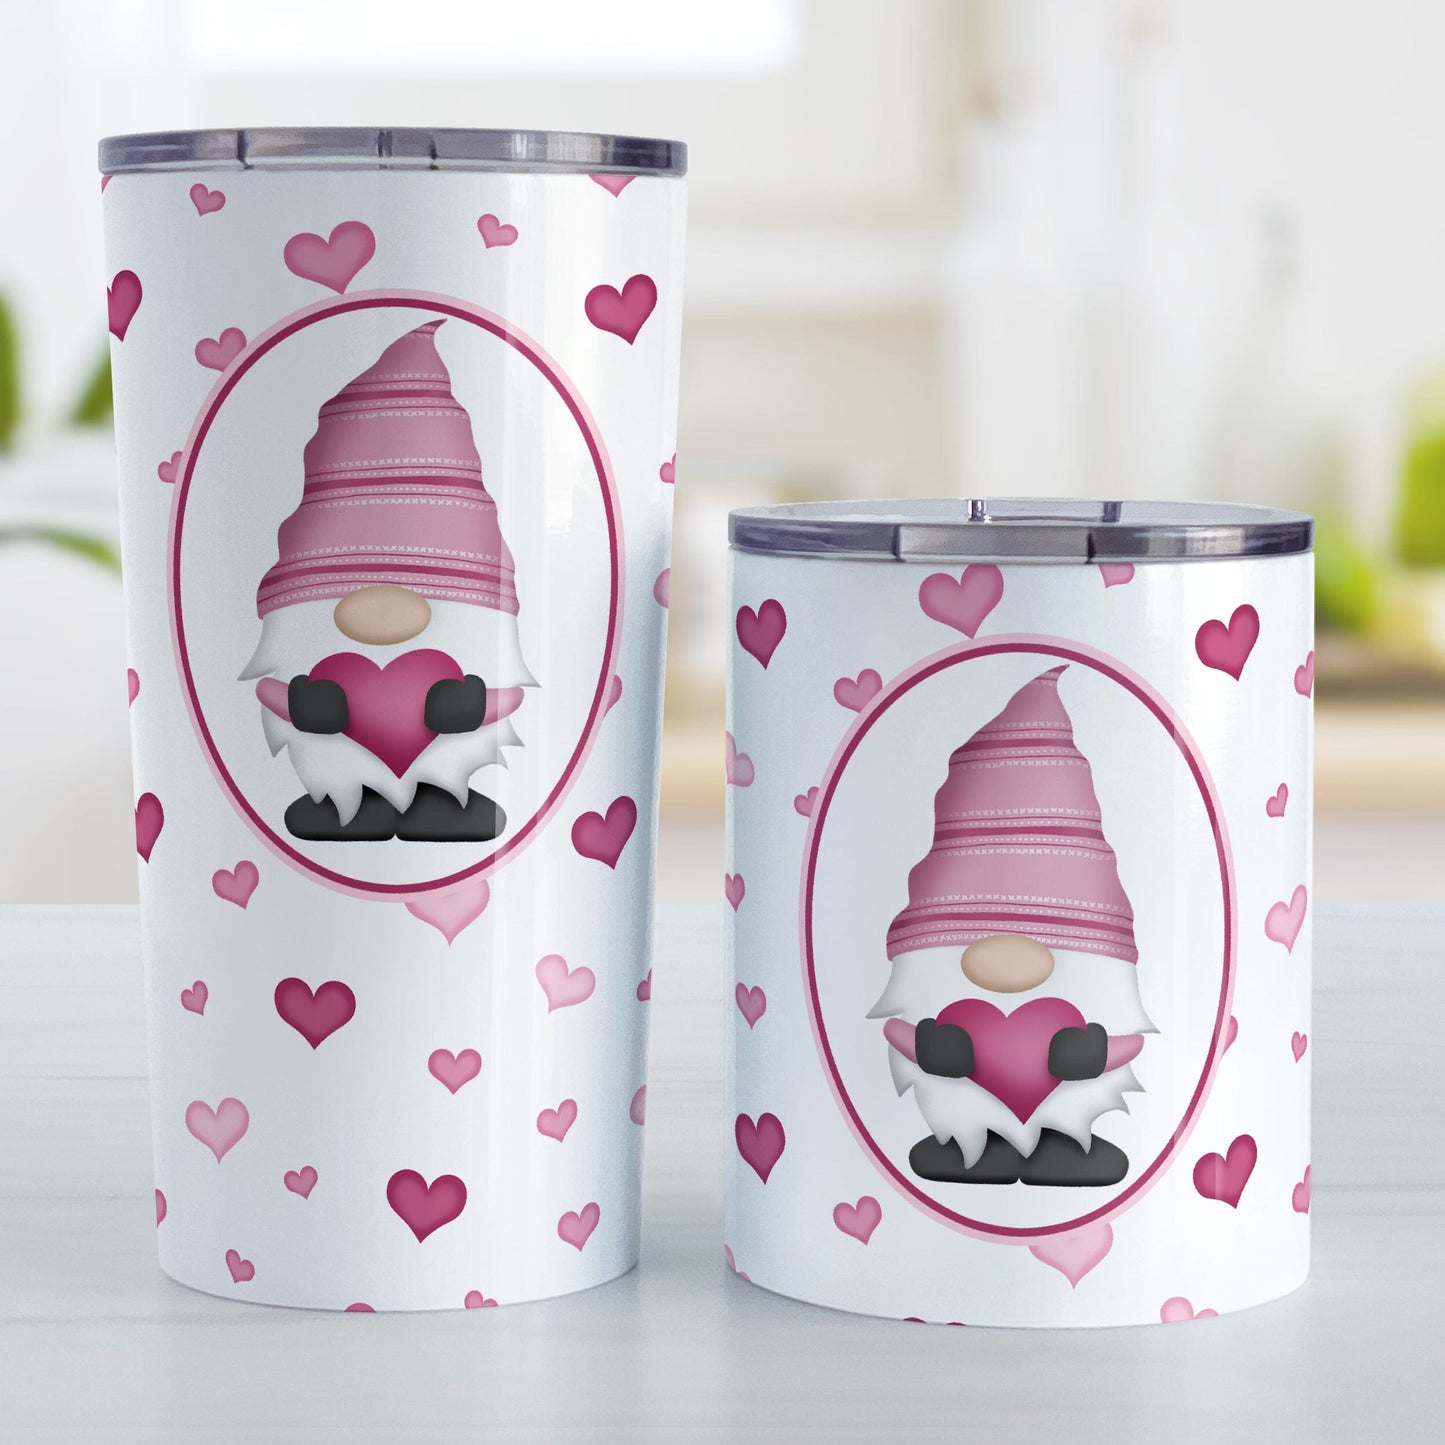 Pink Gnome Dainty Hearts Tumbler Cup (20oz or 10oz) at Amy's Coffee Mugs. Stainless steel tumbler cups designed with an adorable pink gnome holding a heart in a white oval over a pattern of cute and dainty hearts in different shades of pink that wrap around the cups. Photo shows both sized cups on a table next to each other. 